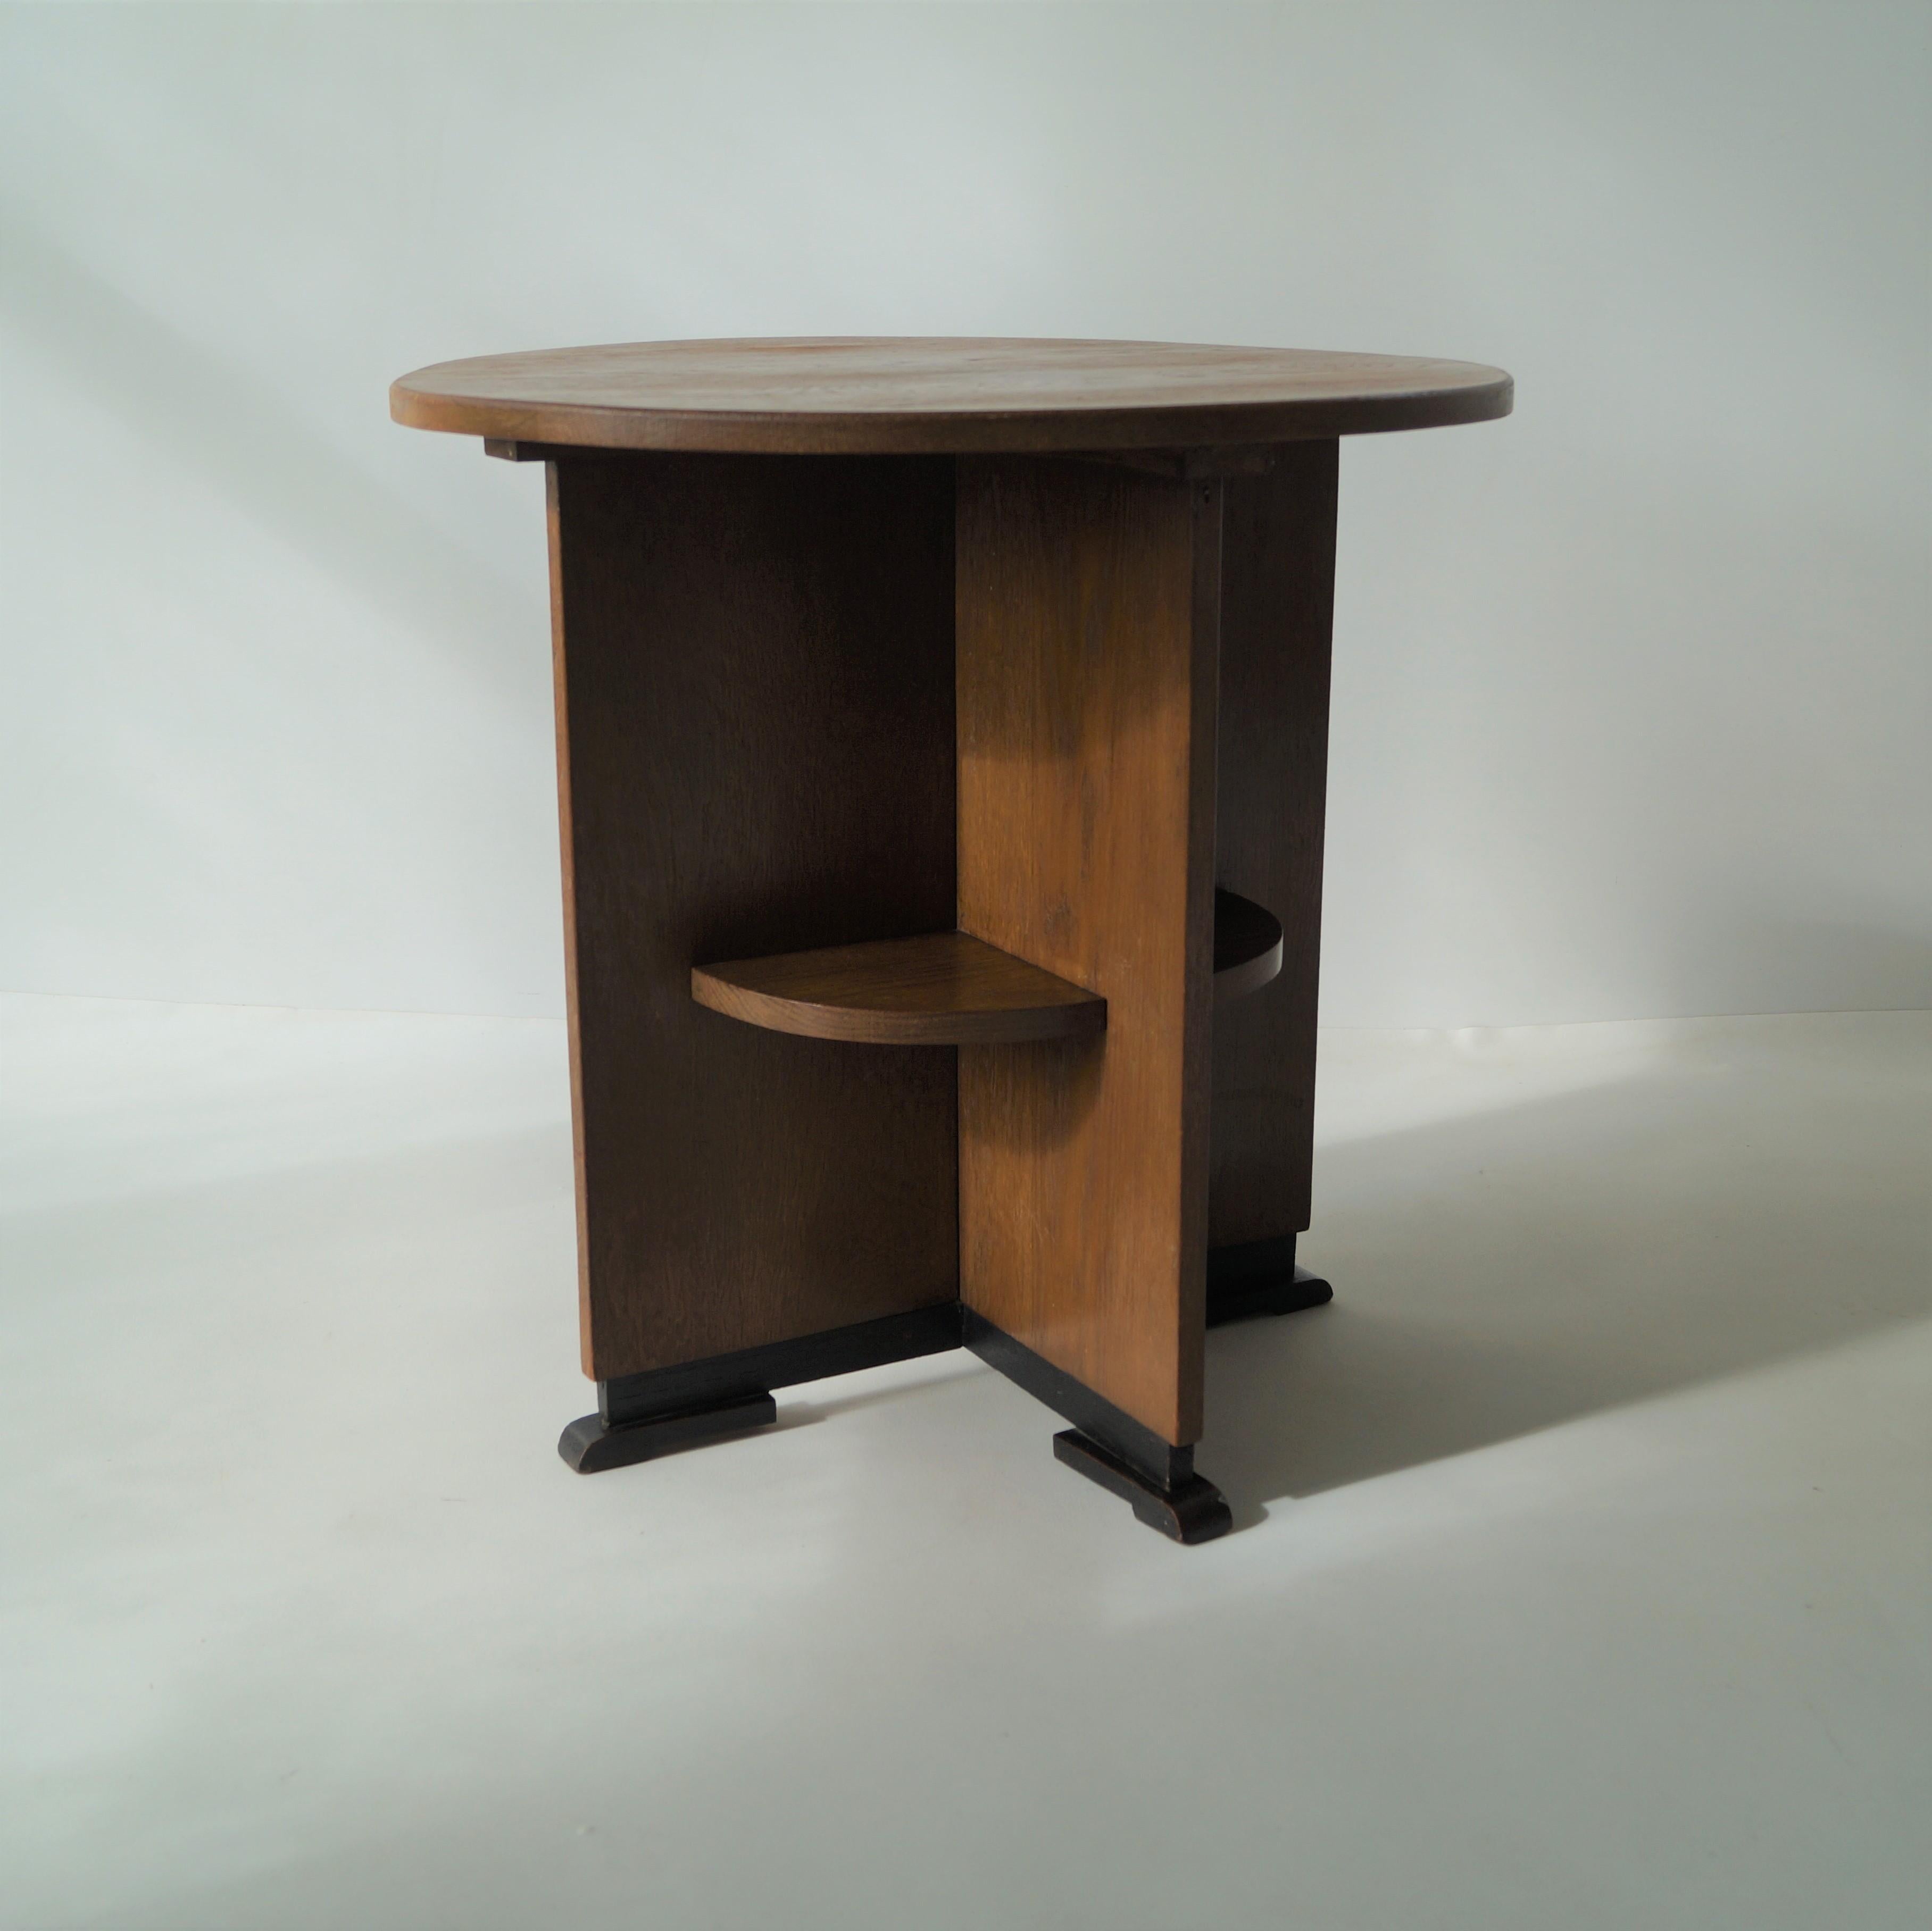 Dutch Art Deco modernist/Haagse School side table, in solid oak and a characteristic design. The table was made around 1920 in the Netherlands.
The base is symmetrically divided into 4 compartments, within each a shelve. The black leg ends look like